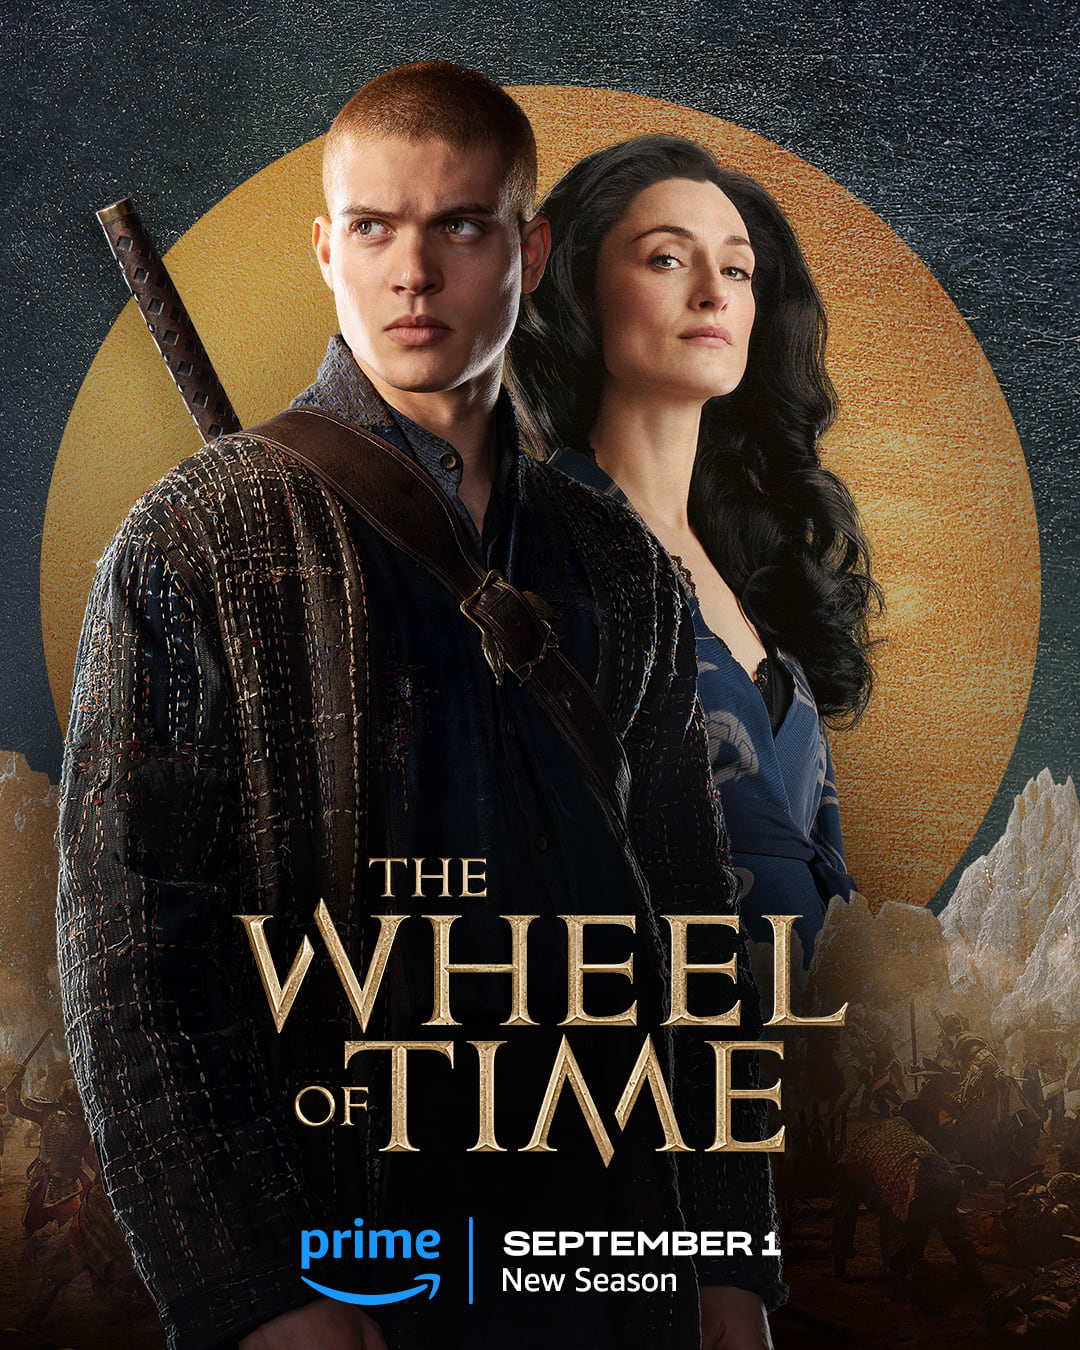 assets/img/movie/Download The Wheel Of Time 2023 S02.jpeg